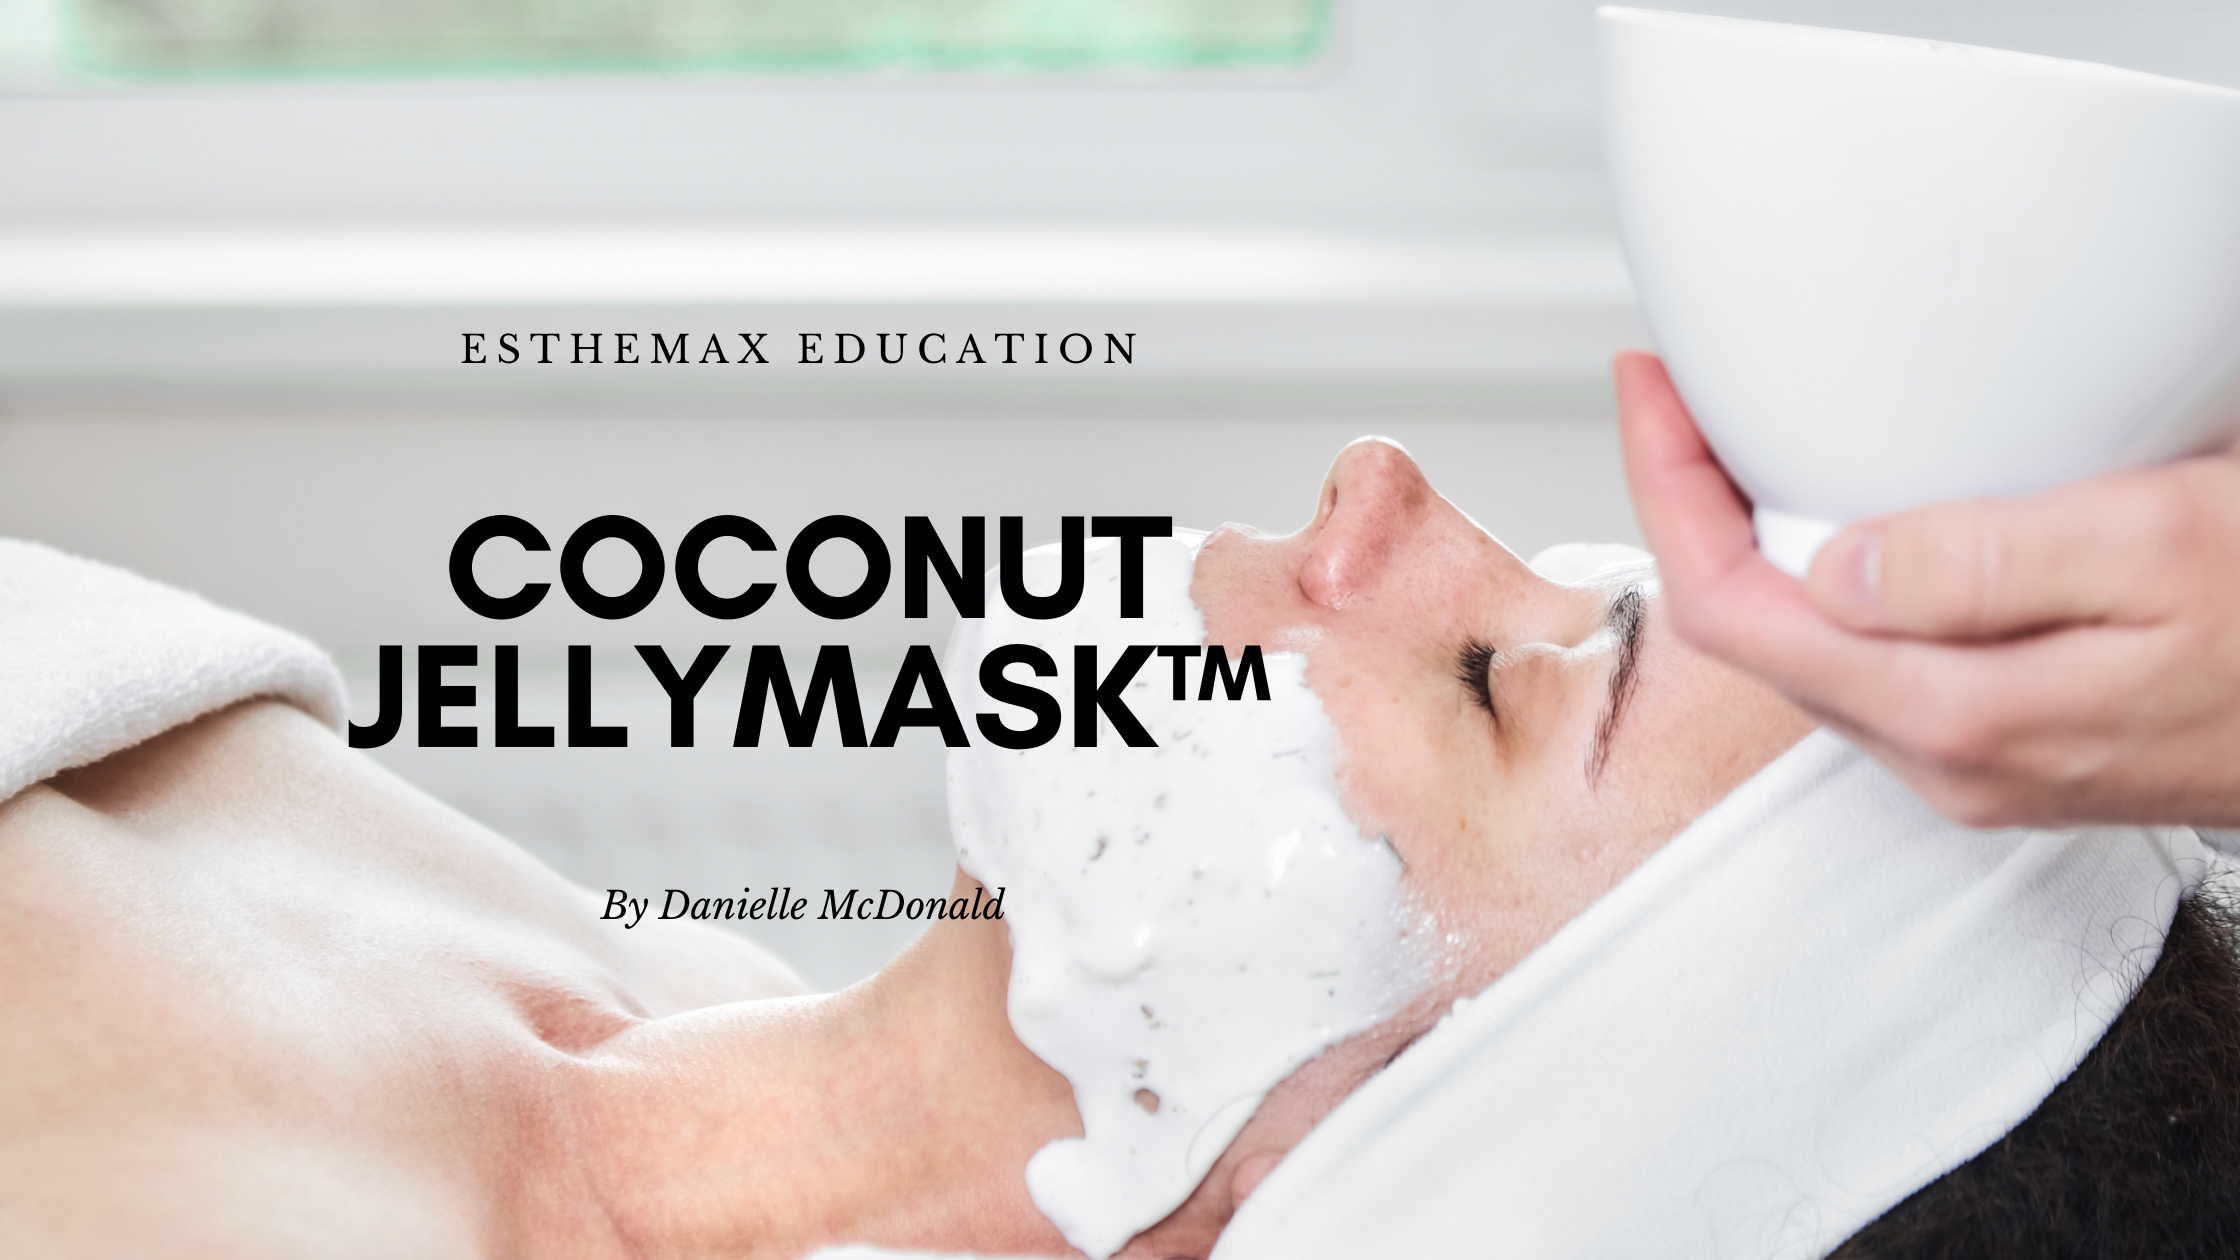 3 Reasons why we love the Esthemax Coconut Jellymask